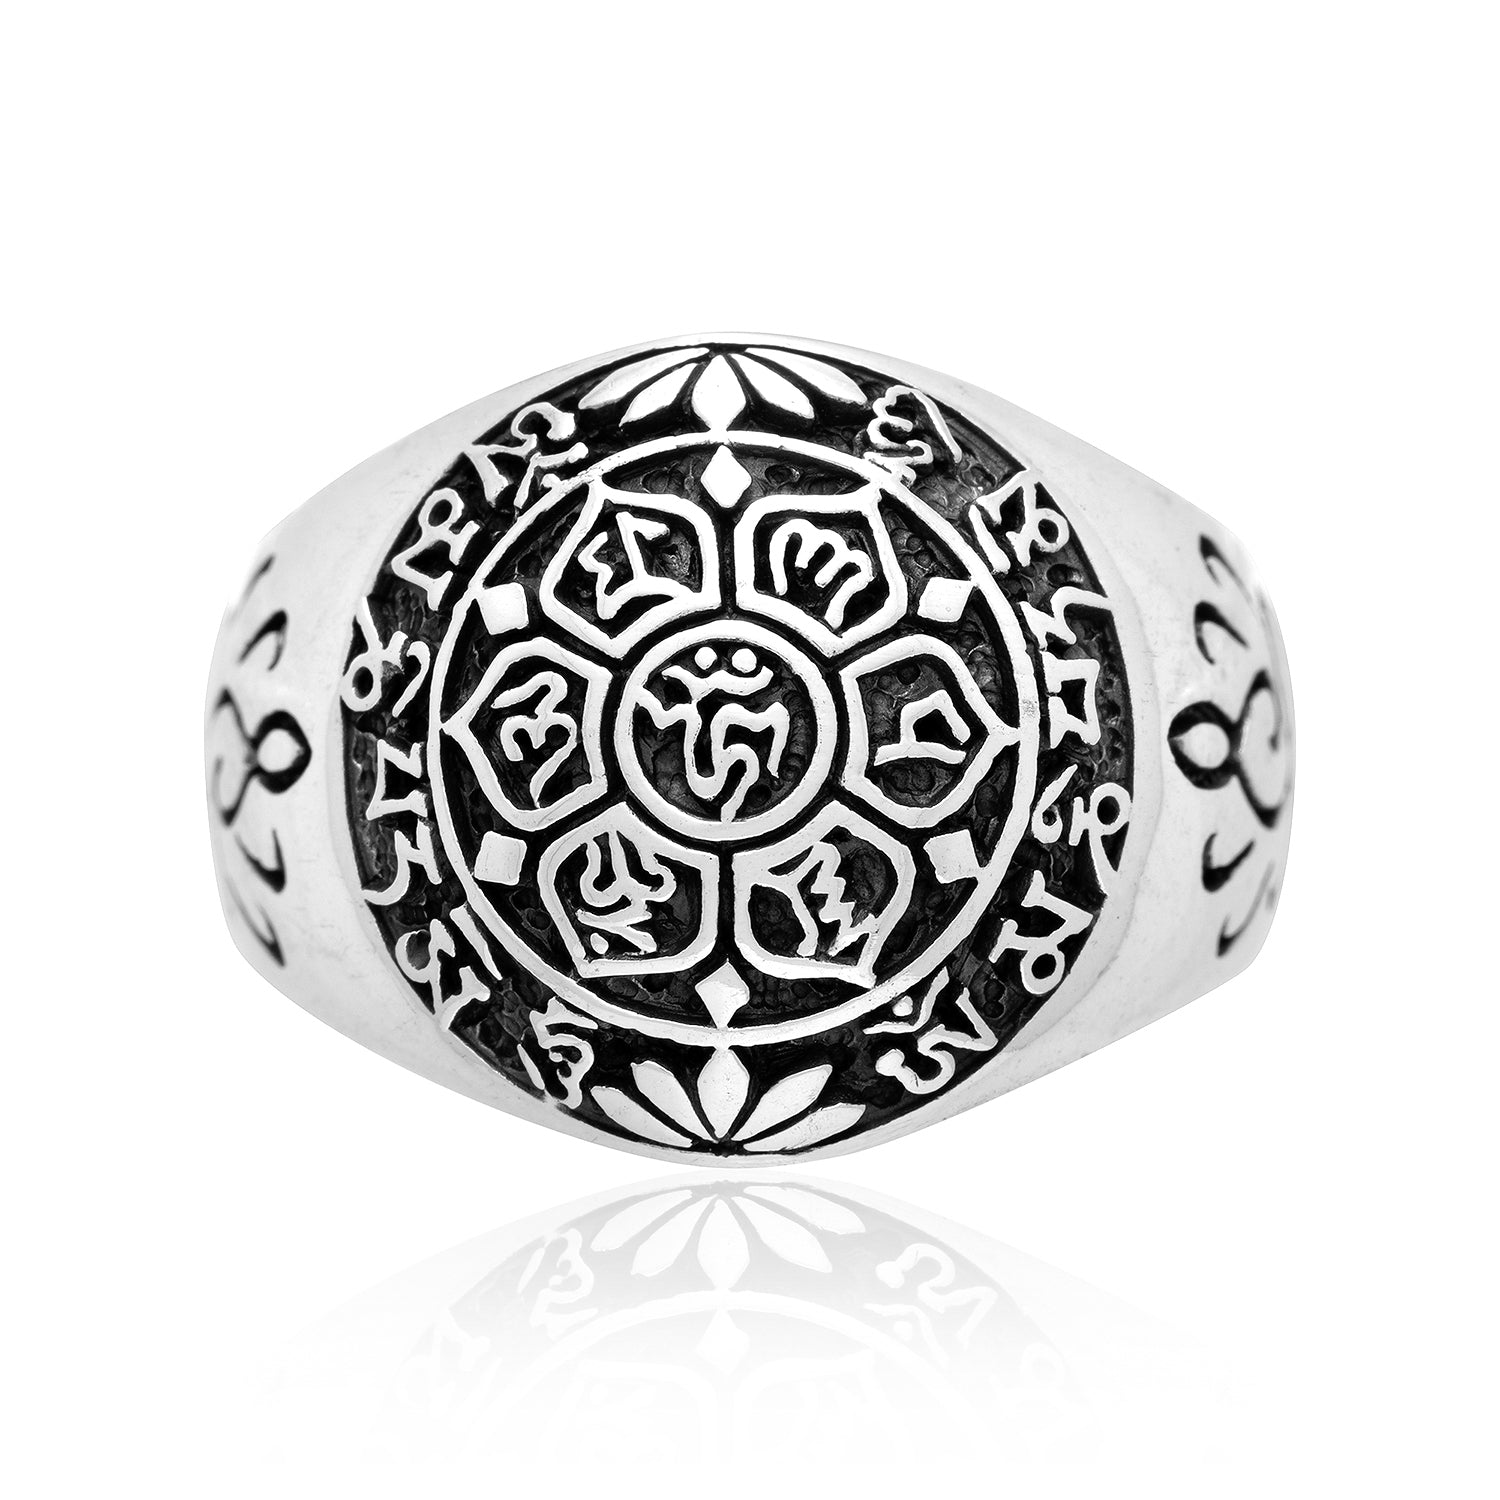 925 Sterling Silver Six Word Mantra Ring - CosmicSerenityShop